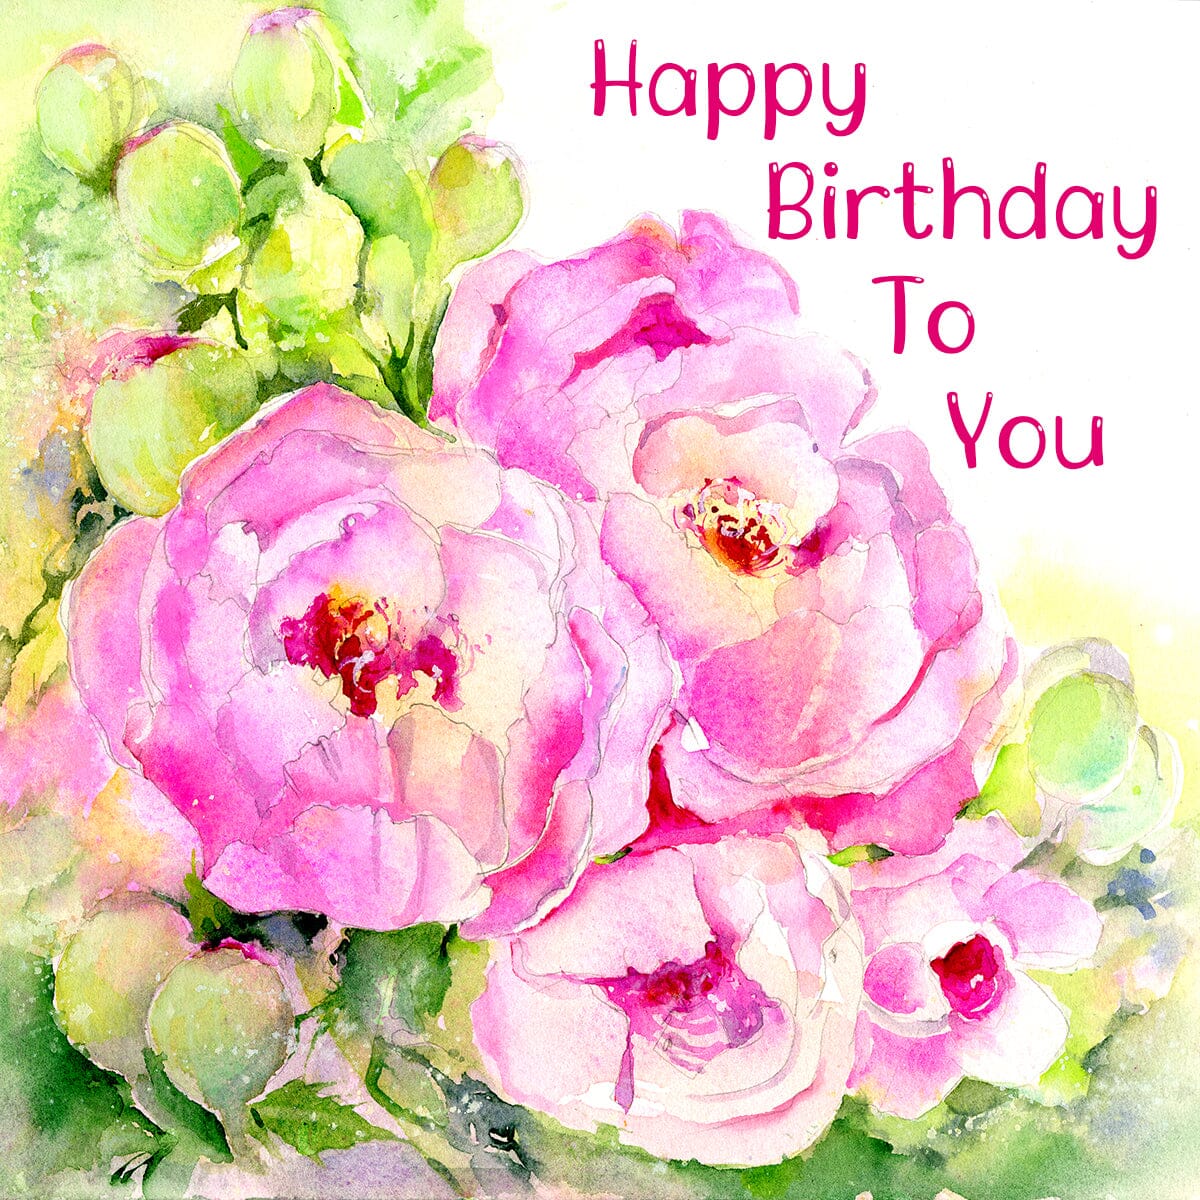 Happy Birthday Pink Peonies Greeting Card designed by artist Sheila Gill